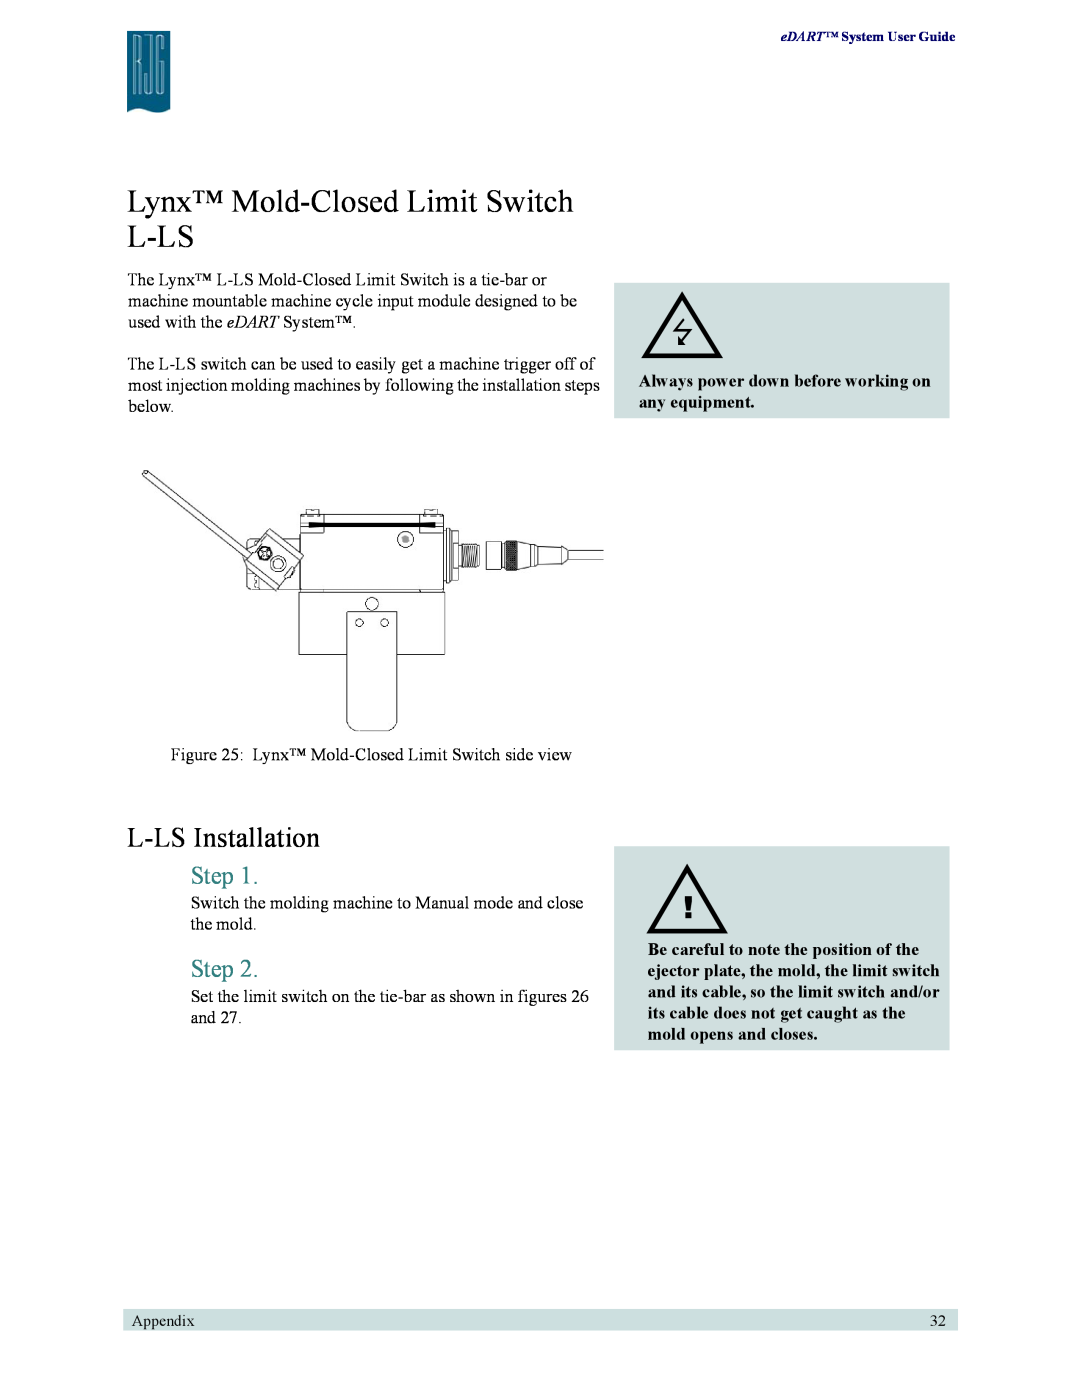 Lynx appendix Step, Always power down before working on any equipment, Lynx Mold-ClosedLimit Switch L-LS 